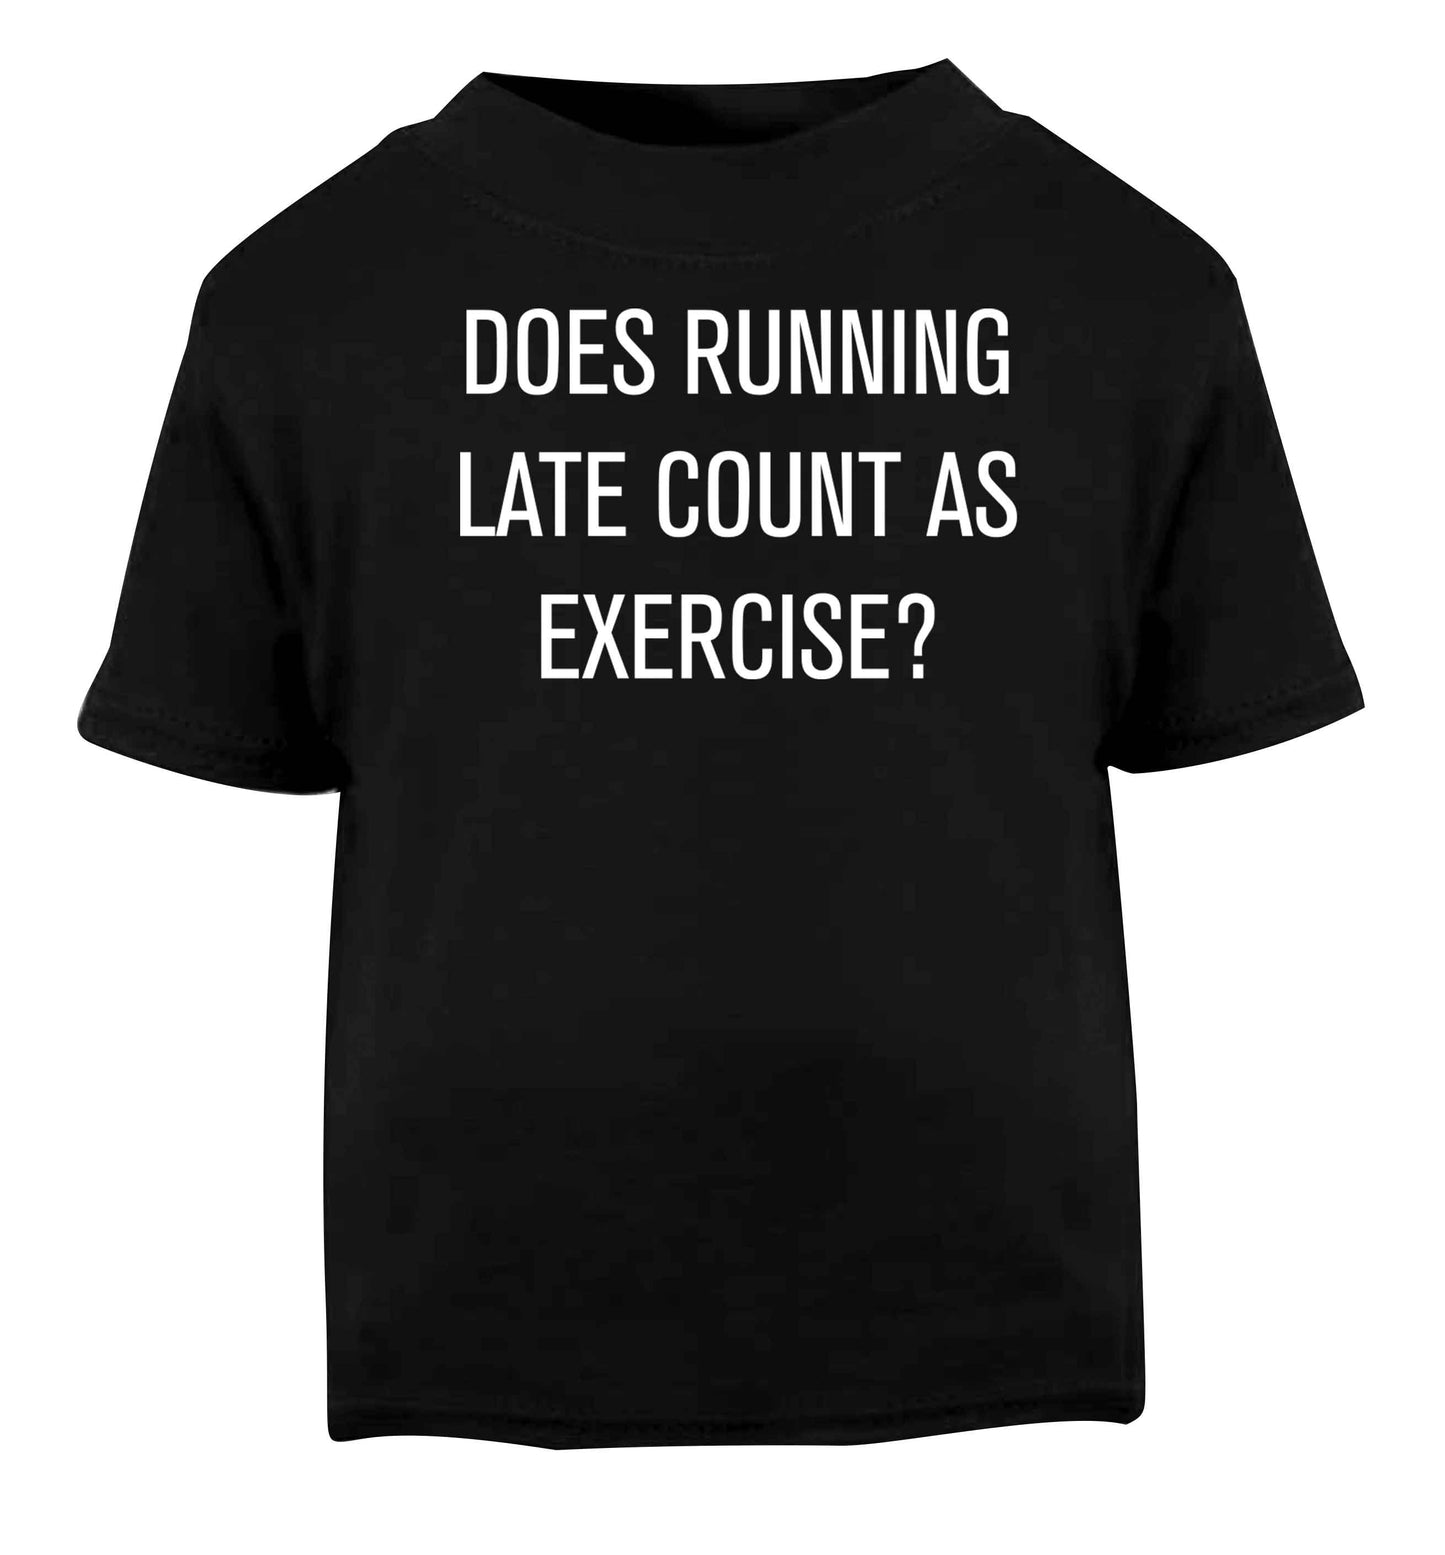 Does running late count as exercise? Black baby toddler Tshirt 2 years